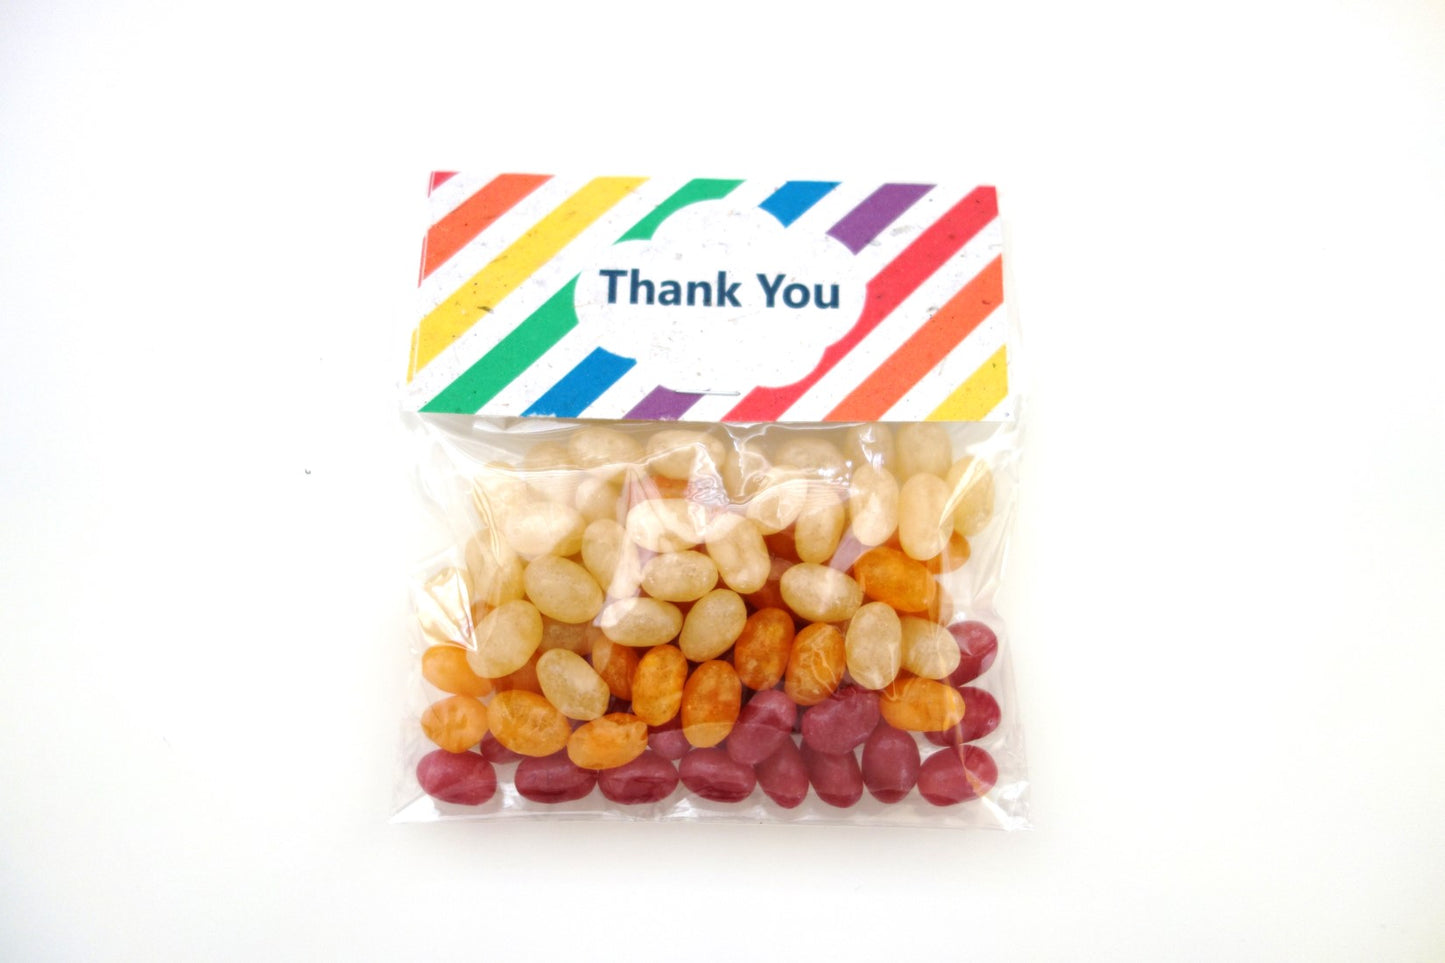 Rainbow Colors Compostable Treat Bag Kit (pack of 8, plant-based plastic bags)